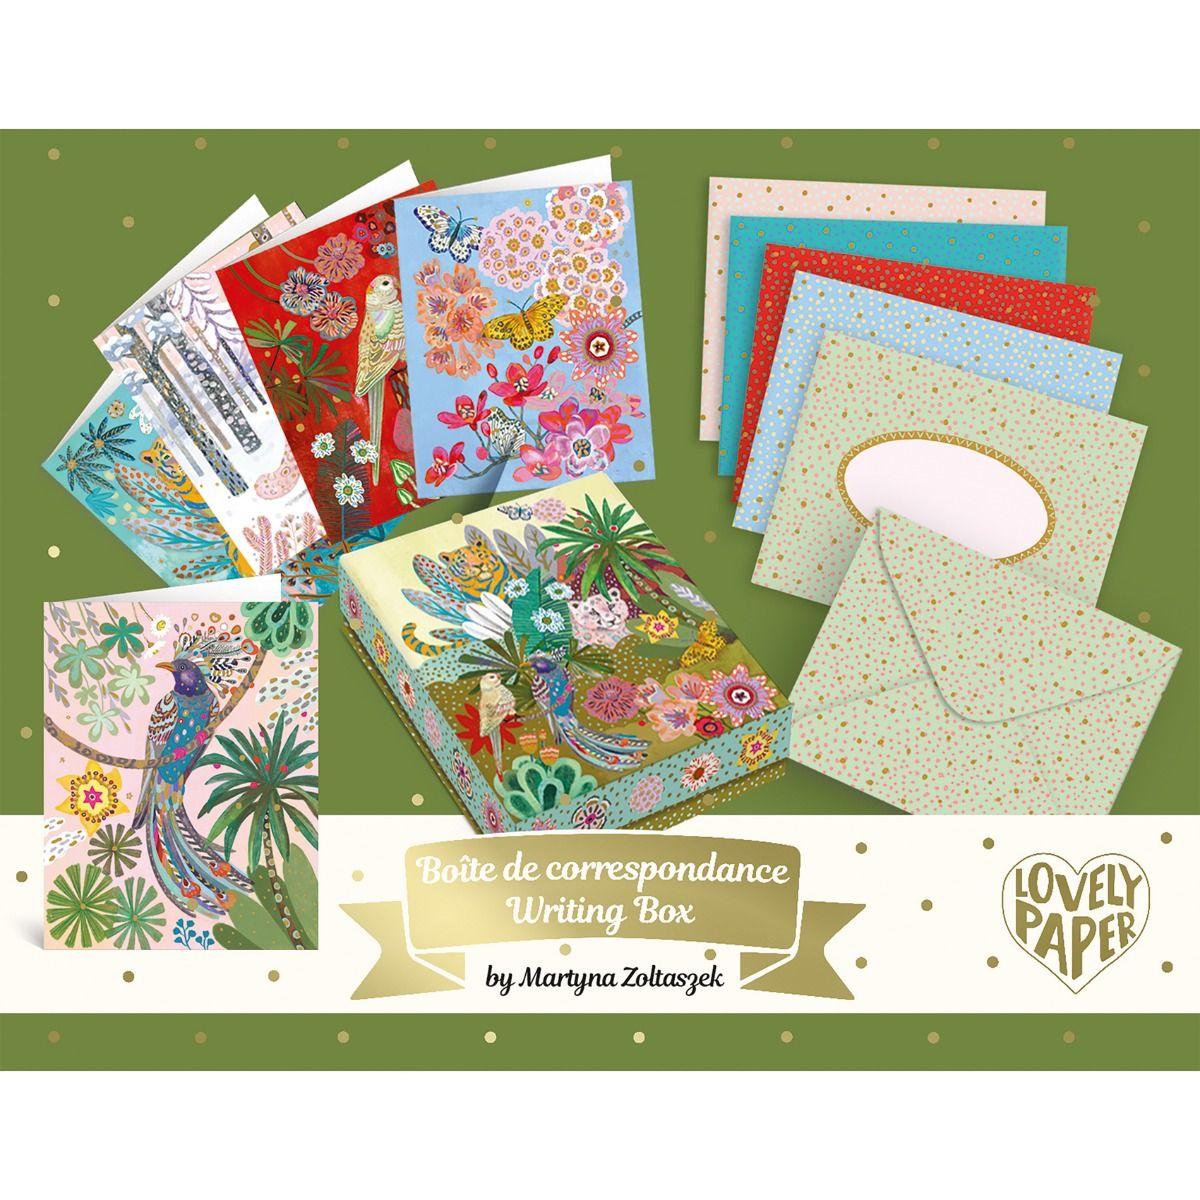 Martyna lovely paper writing set for Djeco